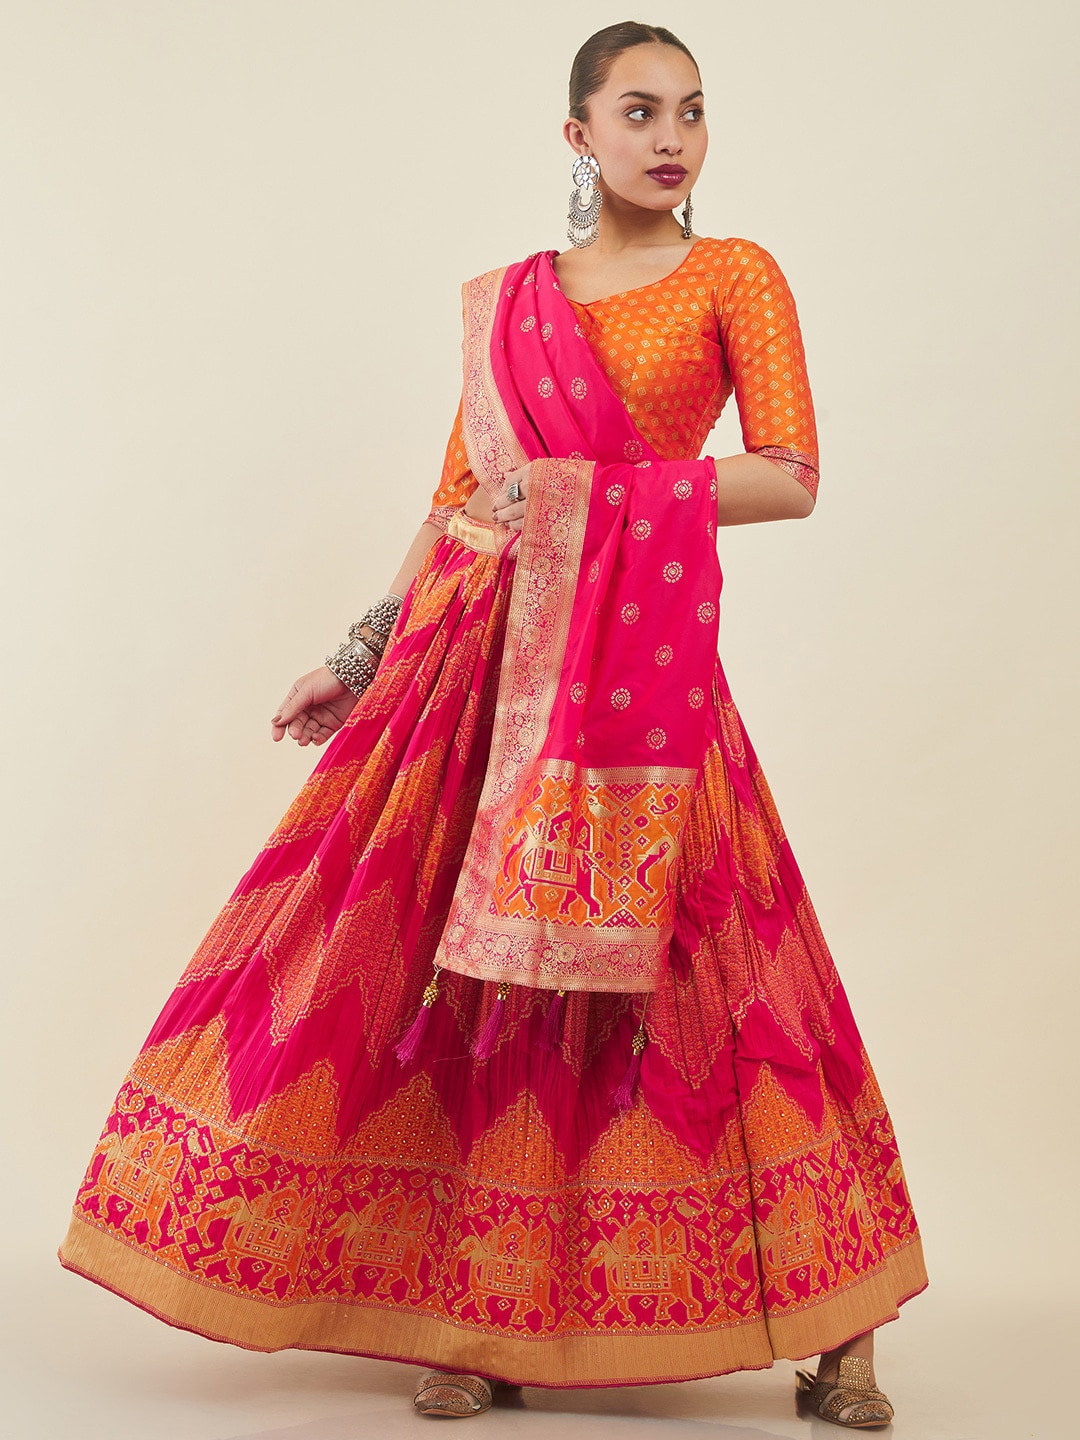 Soch Unstitched Lehenga & Blouse With Dupatta Price in India